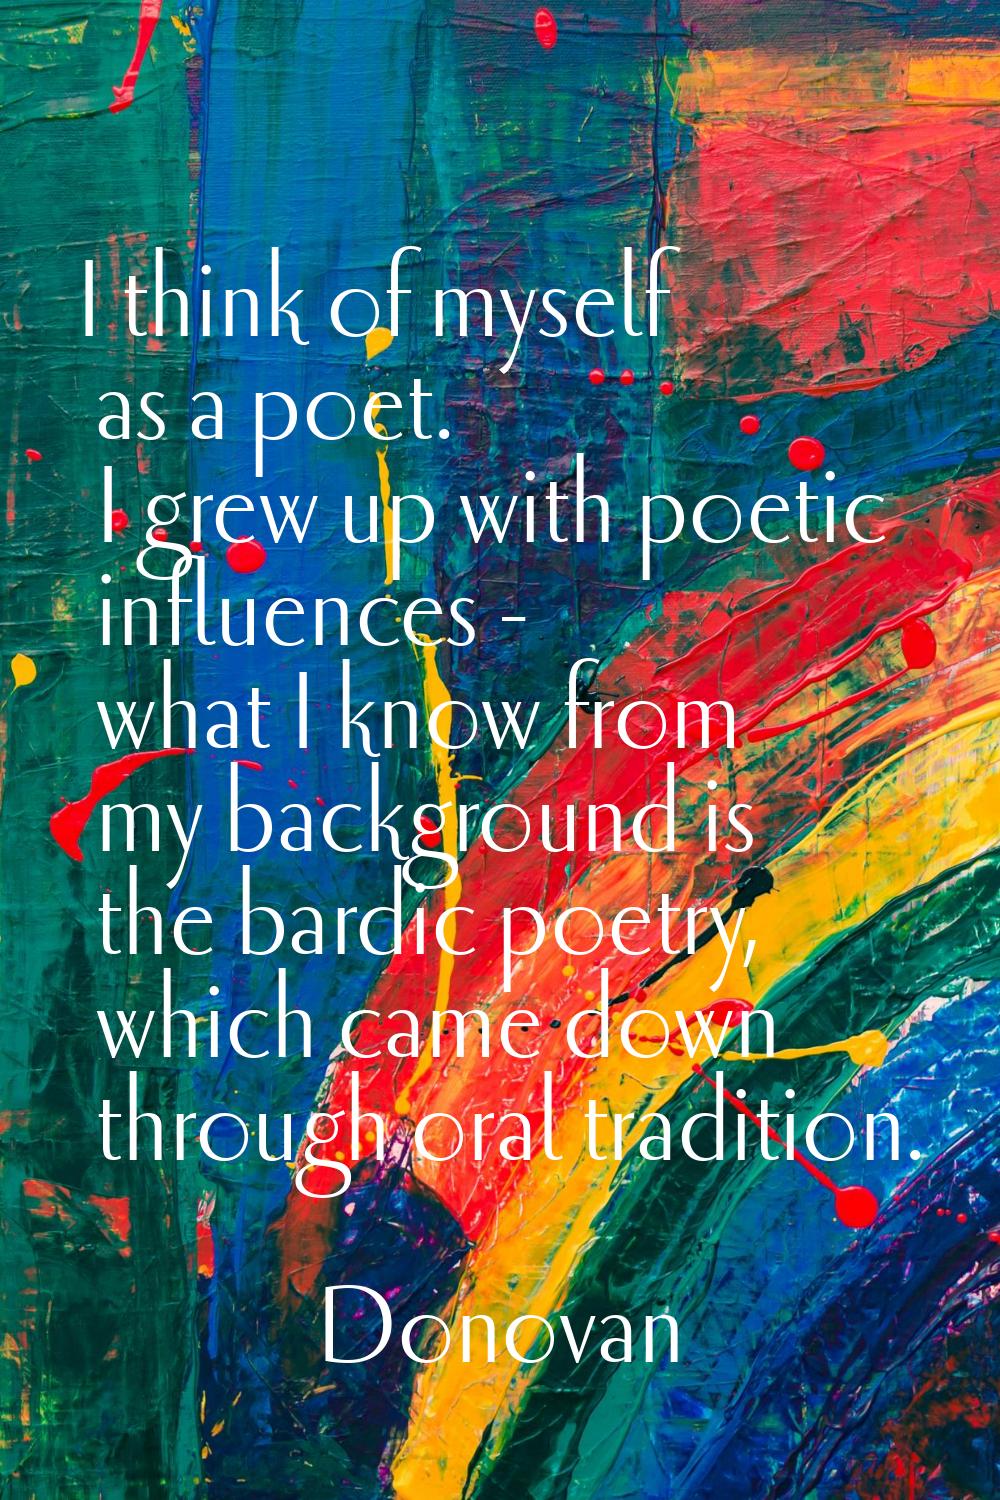 I think of myself as a poet. I grew up with poetic influences - what I know from my background is t